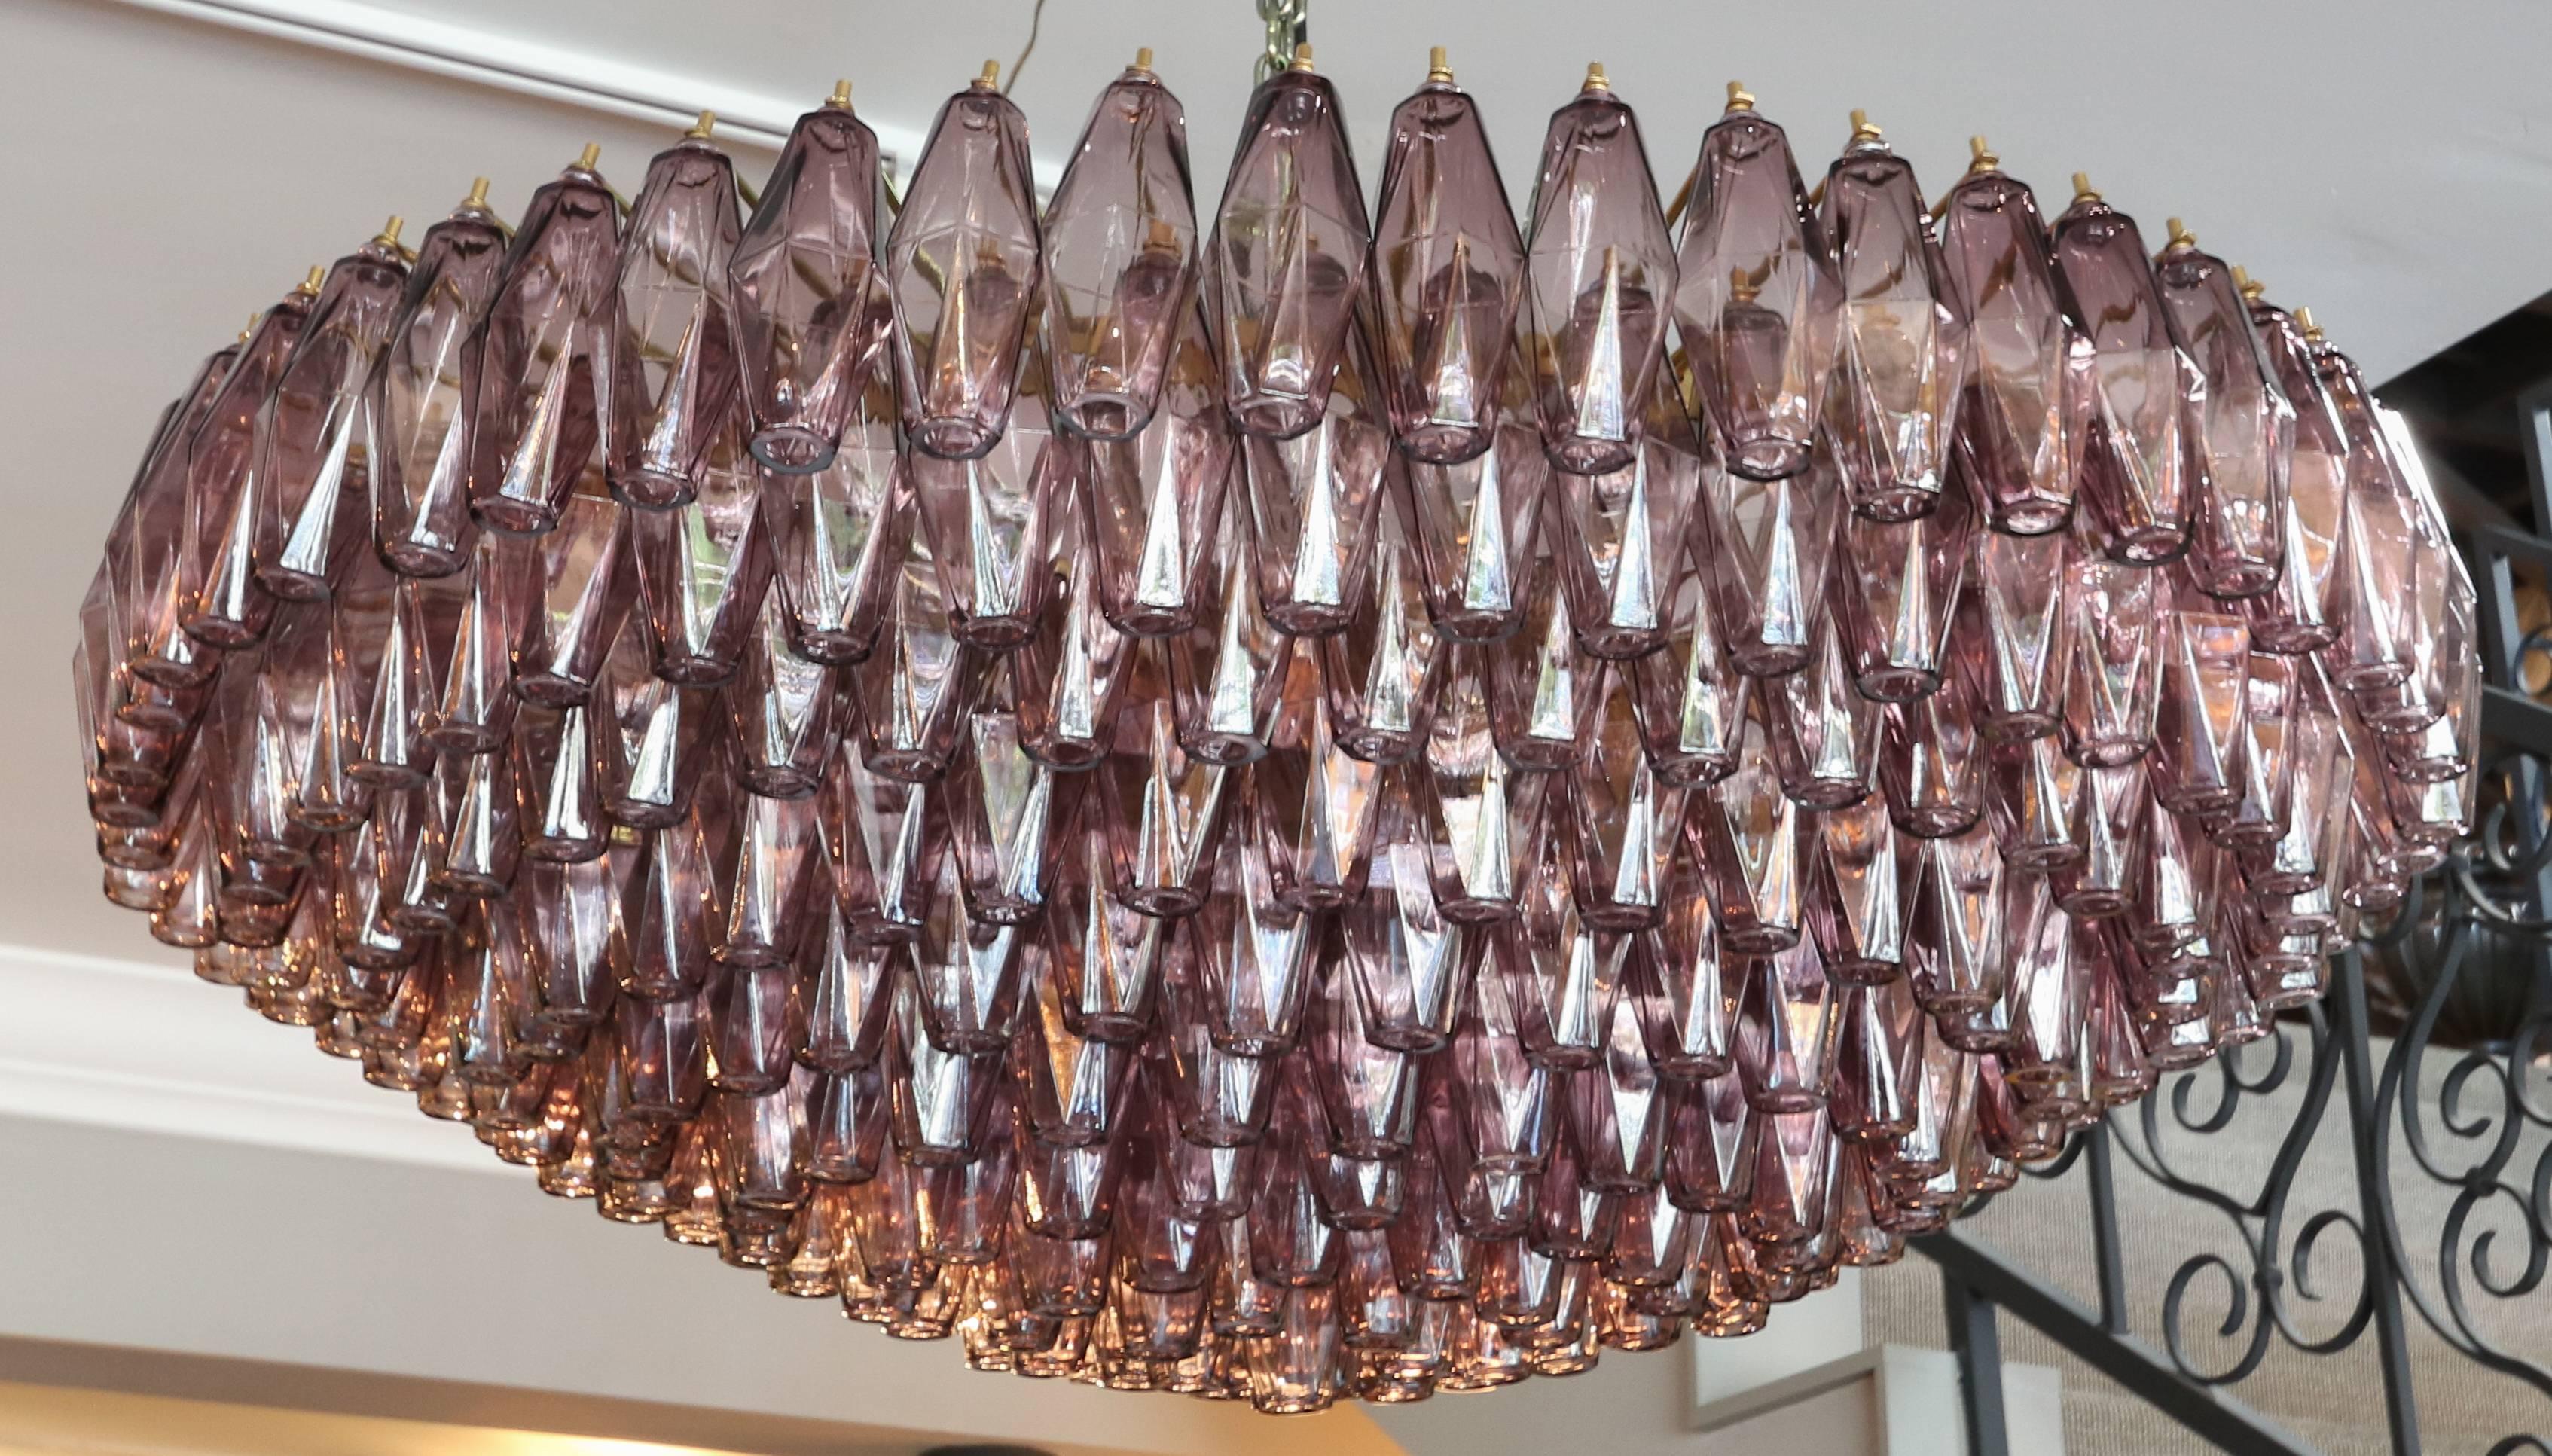 Large round chandelier from the 1970s with 271 amethyst polyhedron glass pieces.